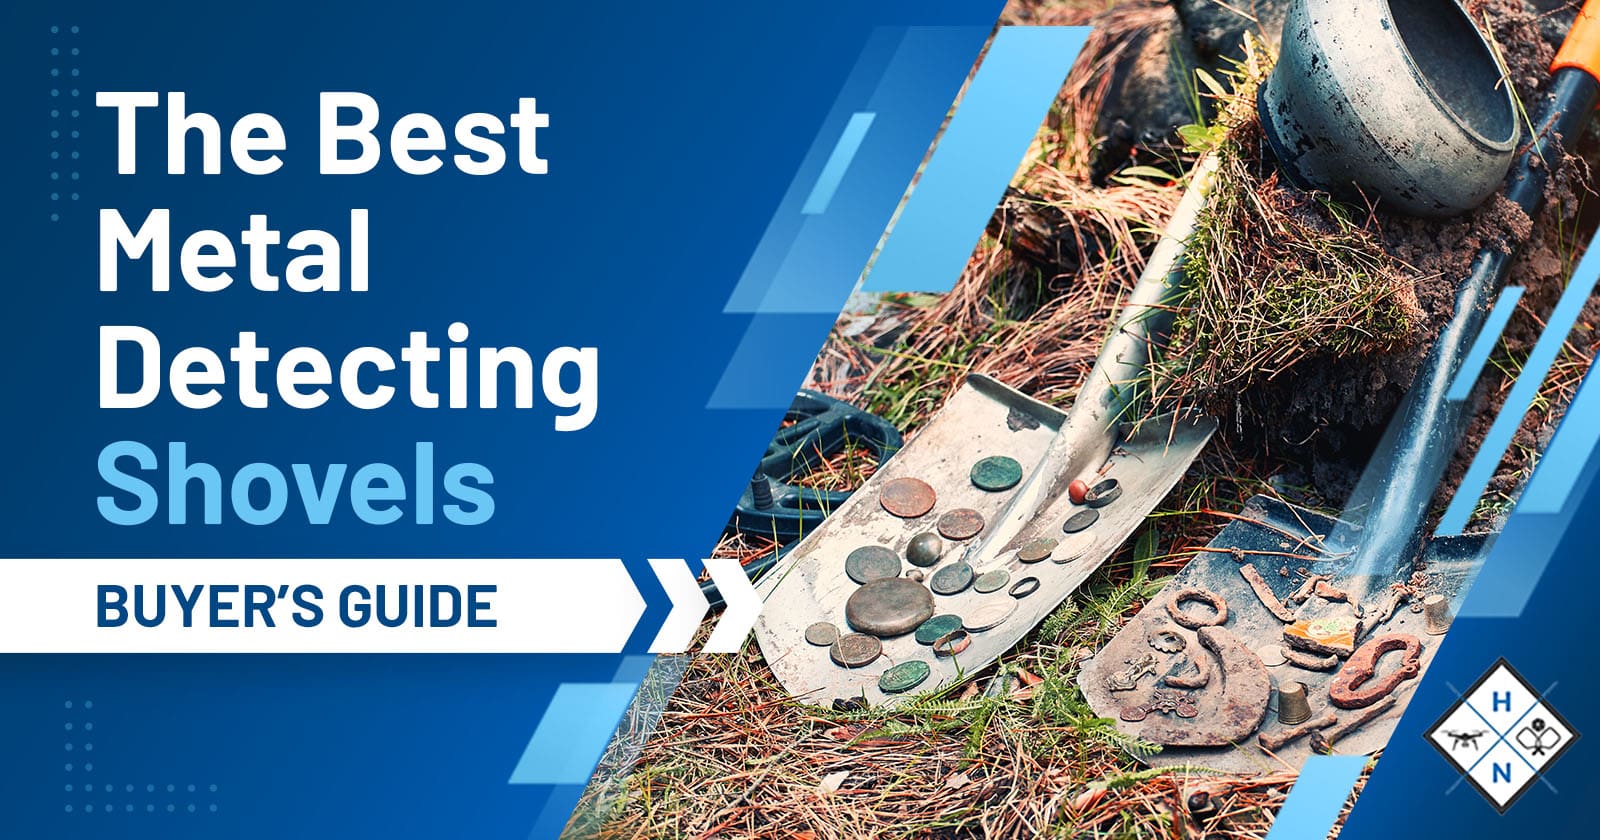 The Best Metal Detecting Shovels [BUYER’S GUIDE]